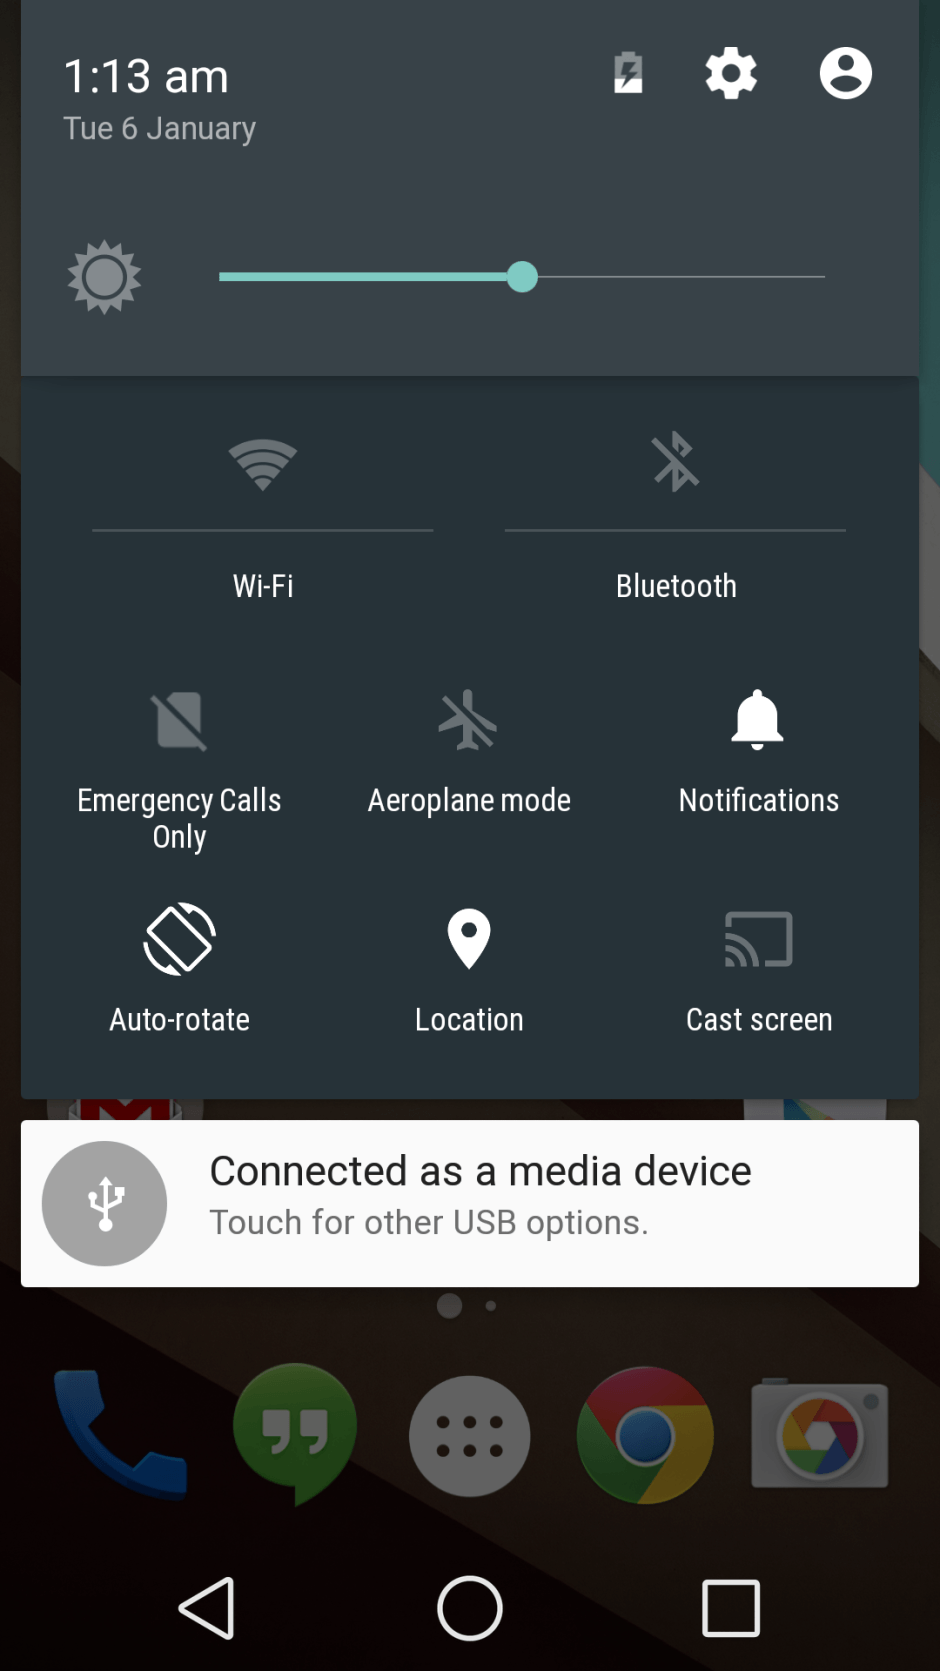 The new Quick Settings contains actual toggles and not just shortcuts.